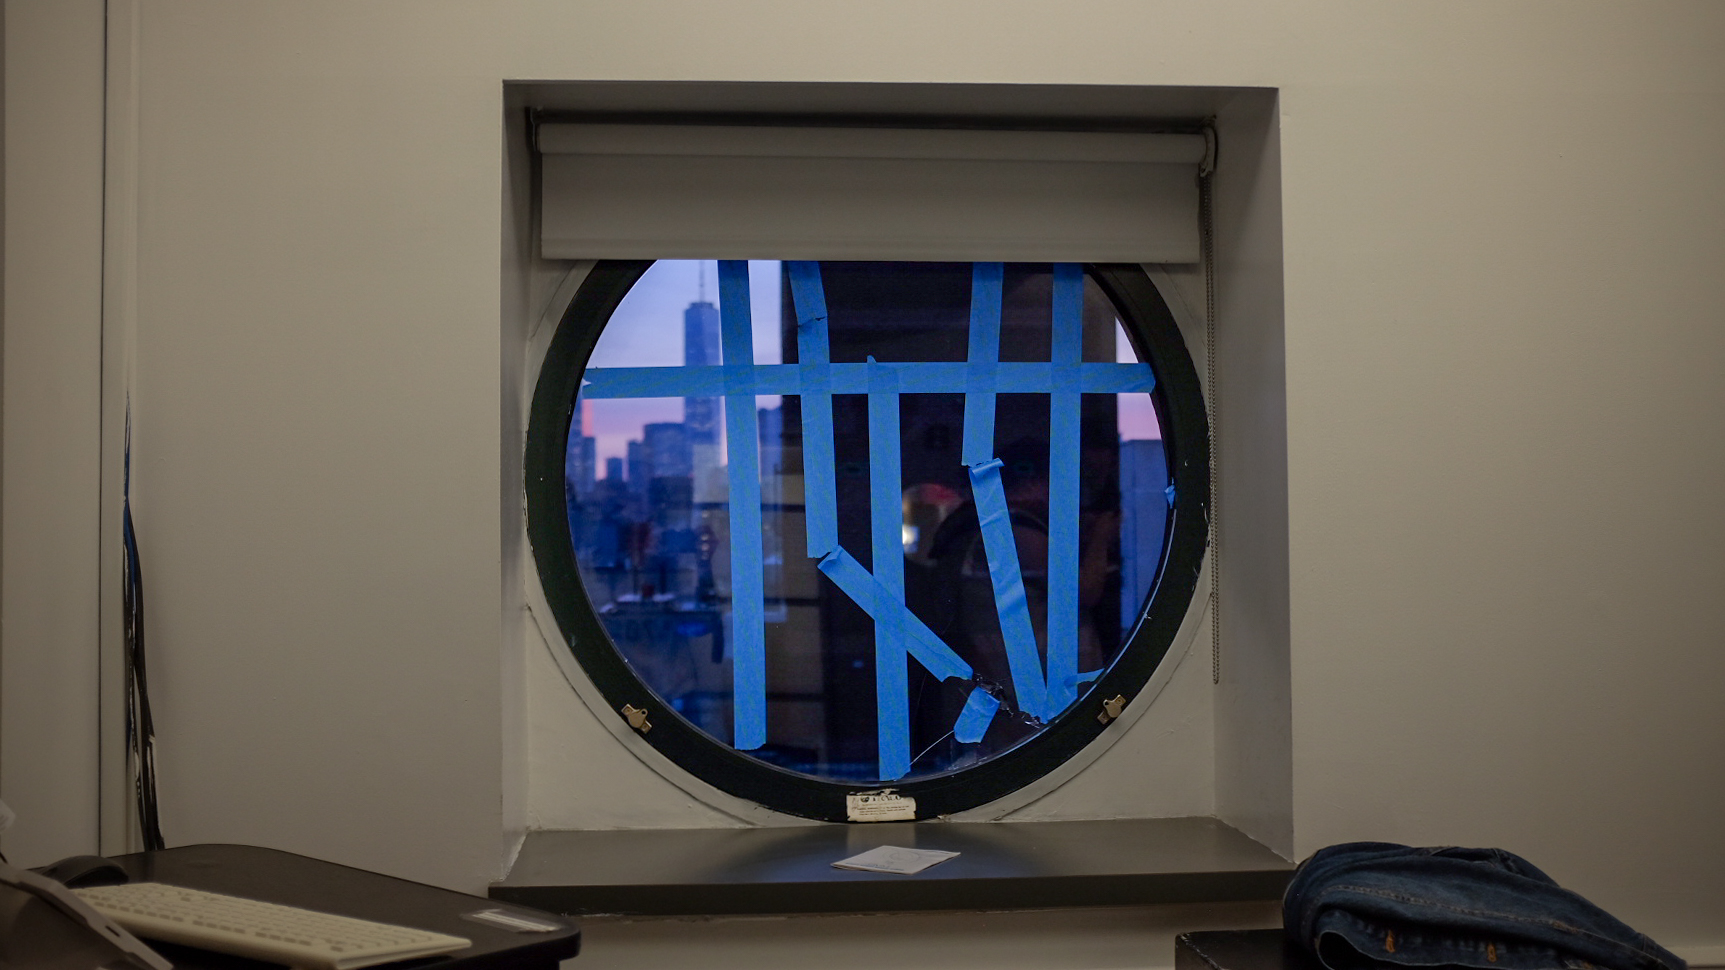 Image of a circular window with tape covering cracks.